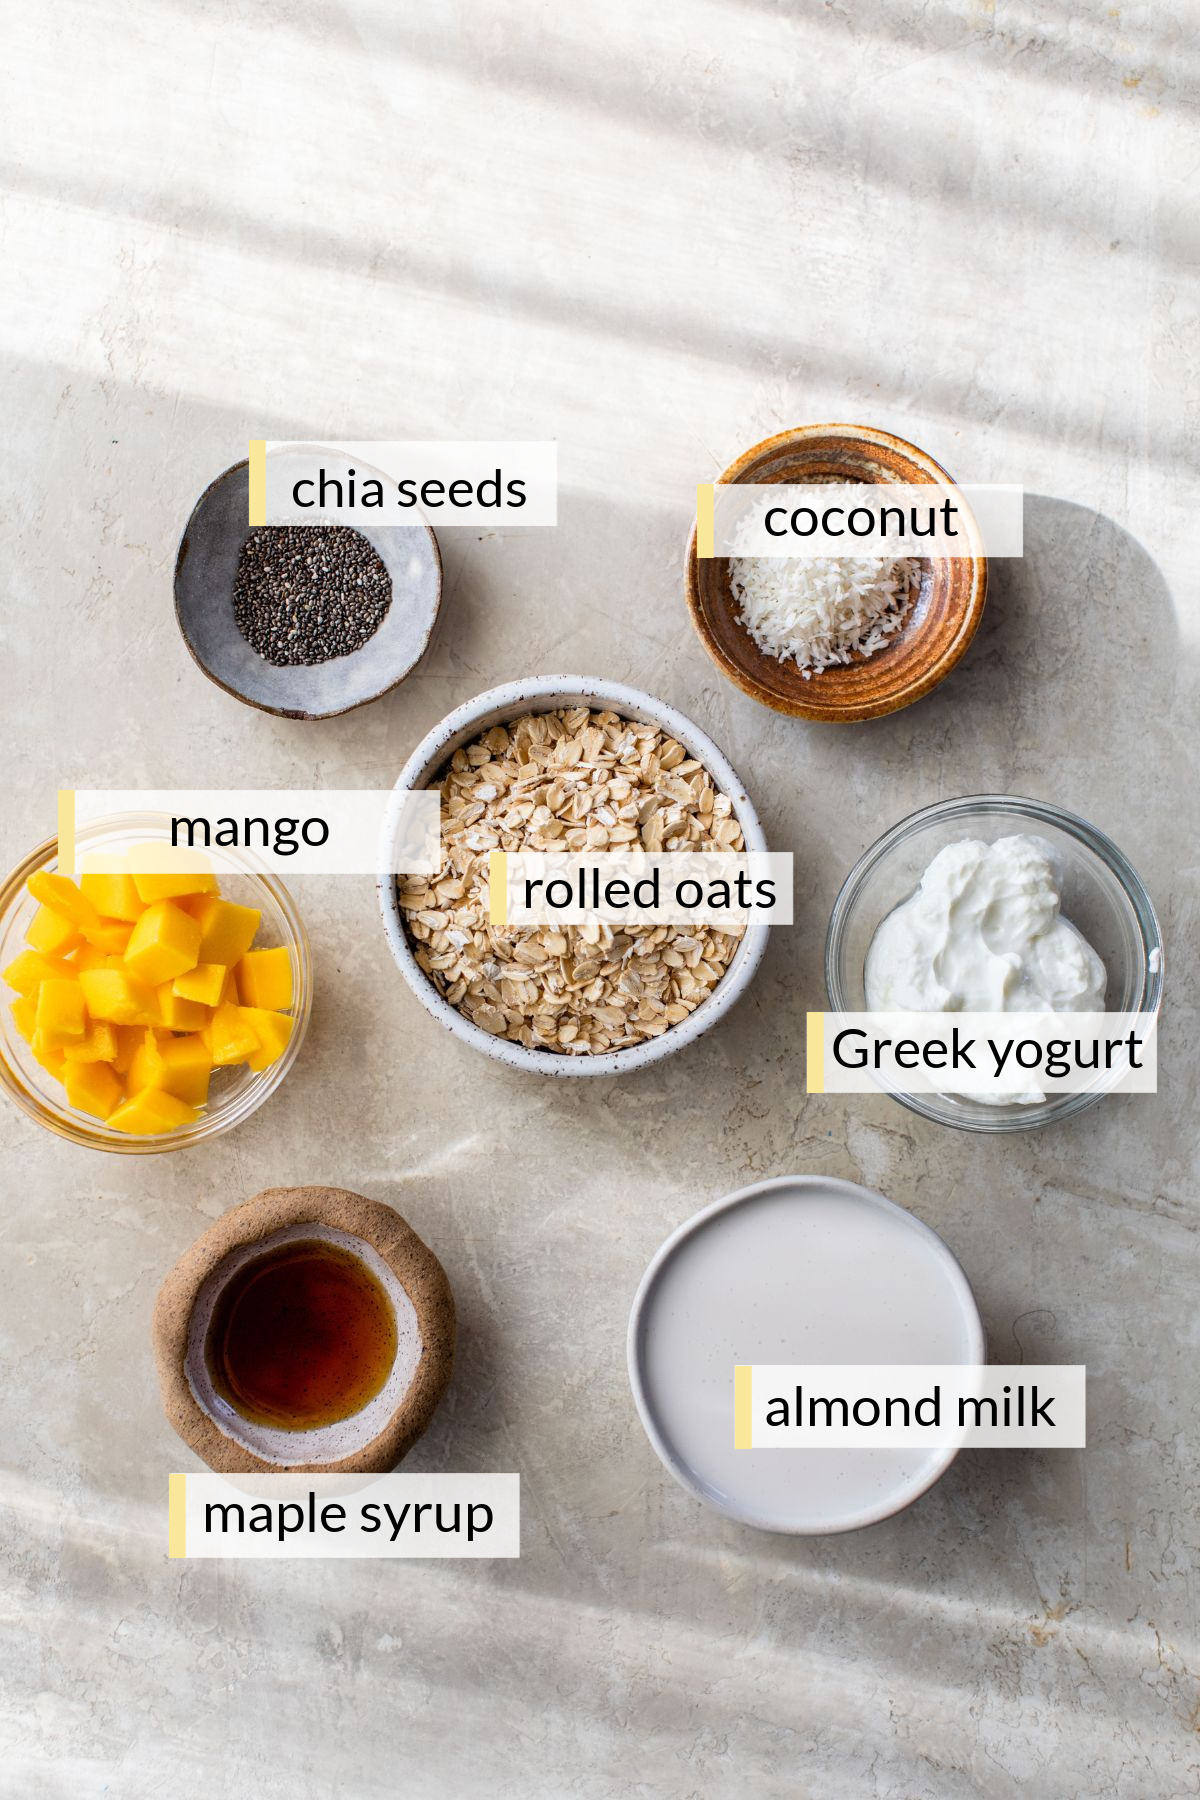 Ingredients for mango overnight oats divided into small bowls.